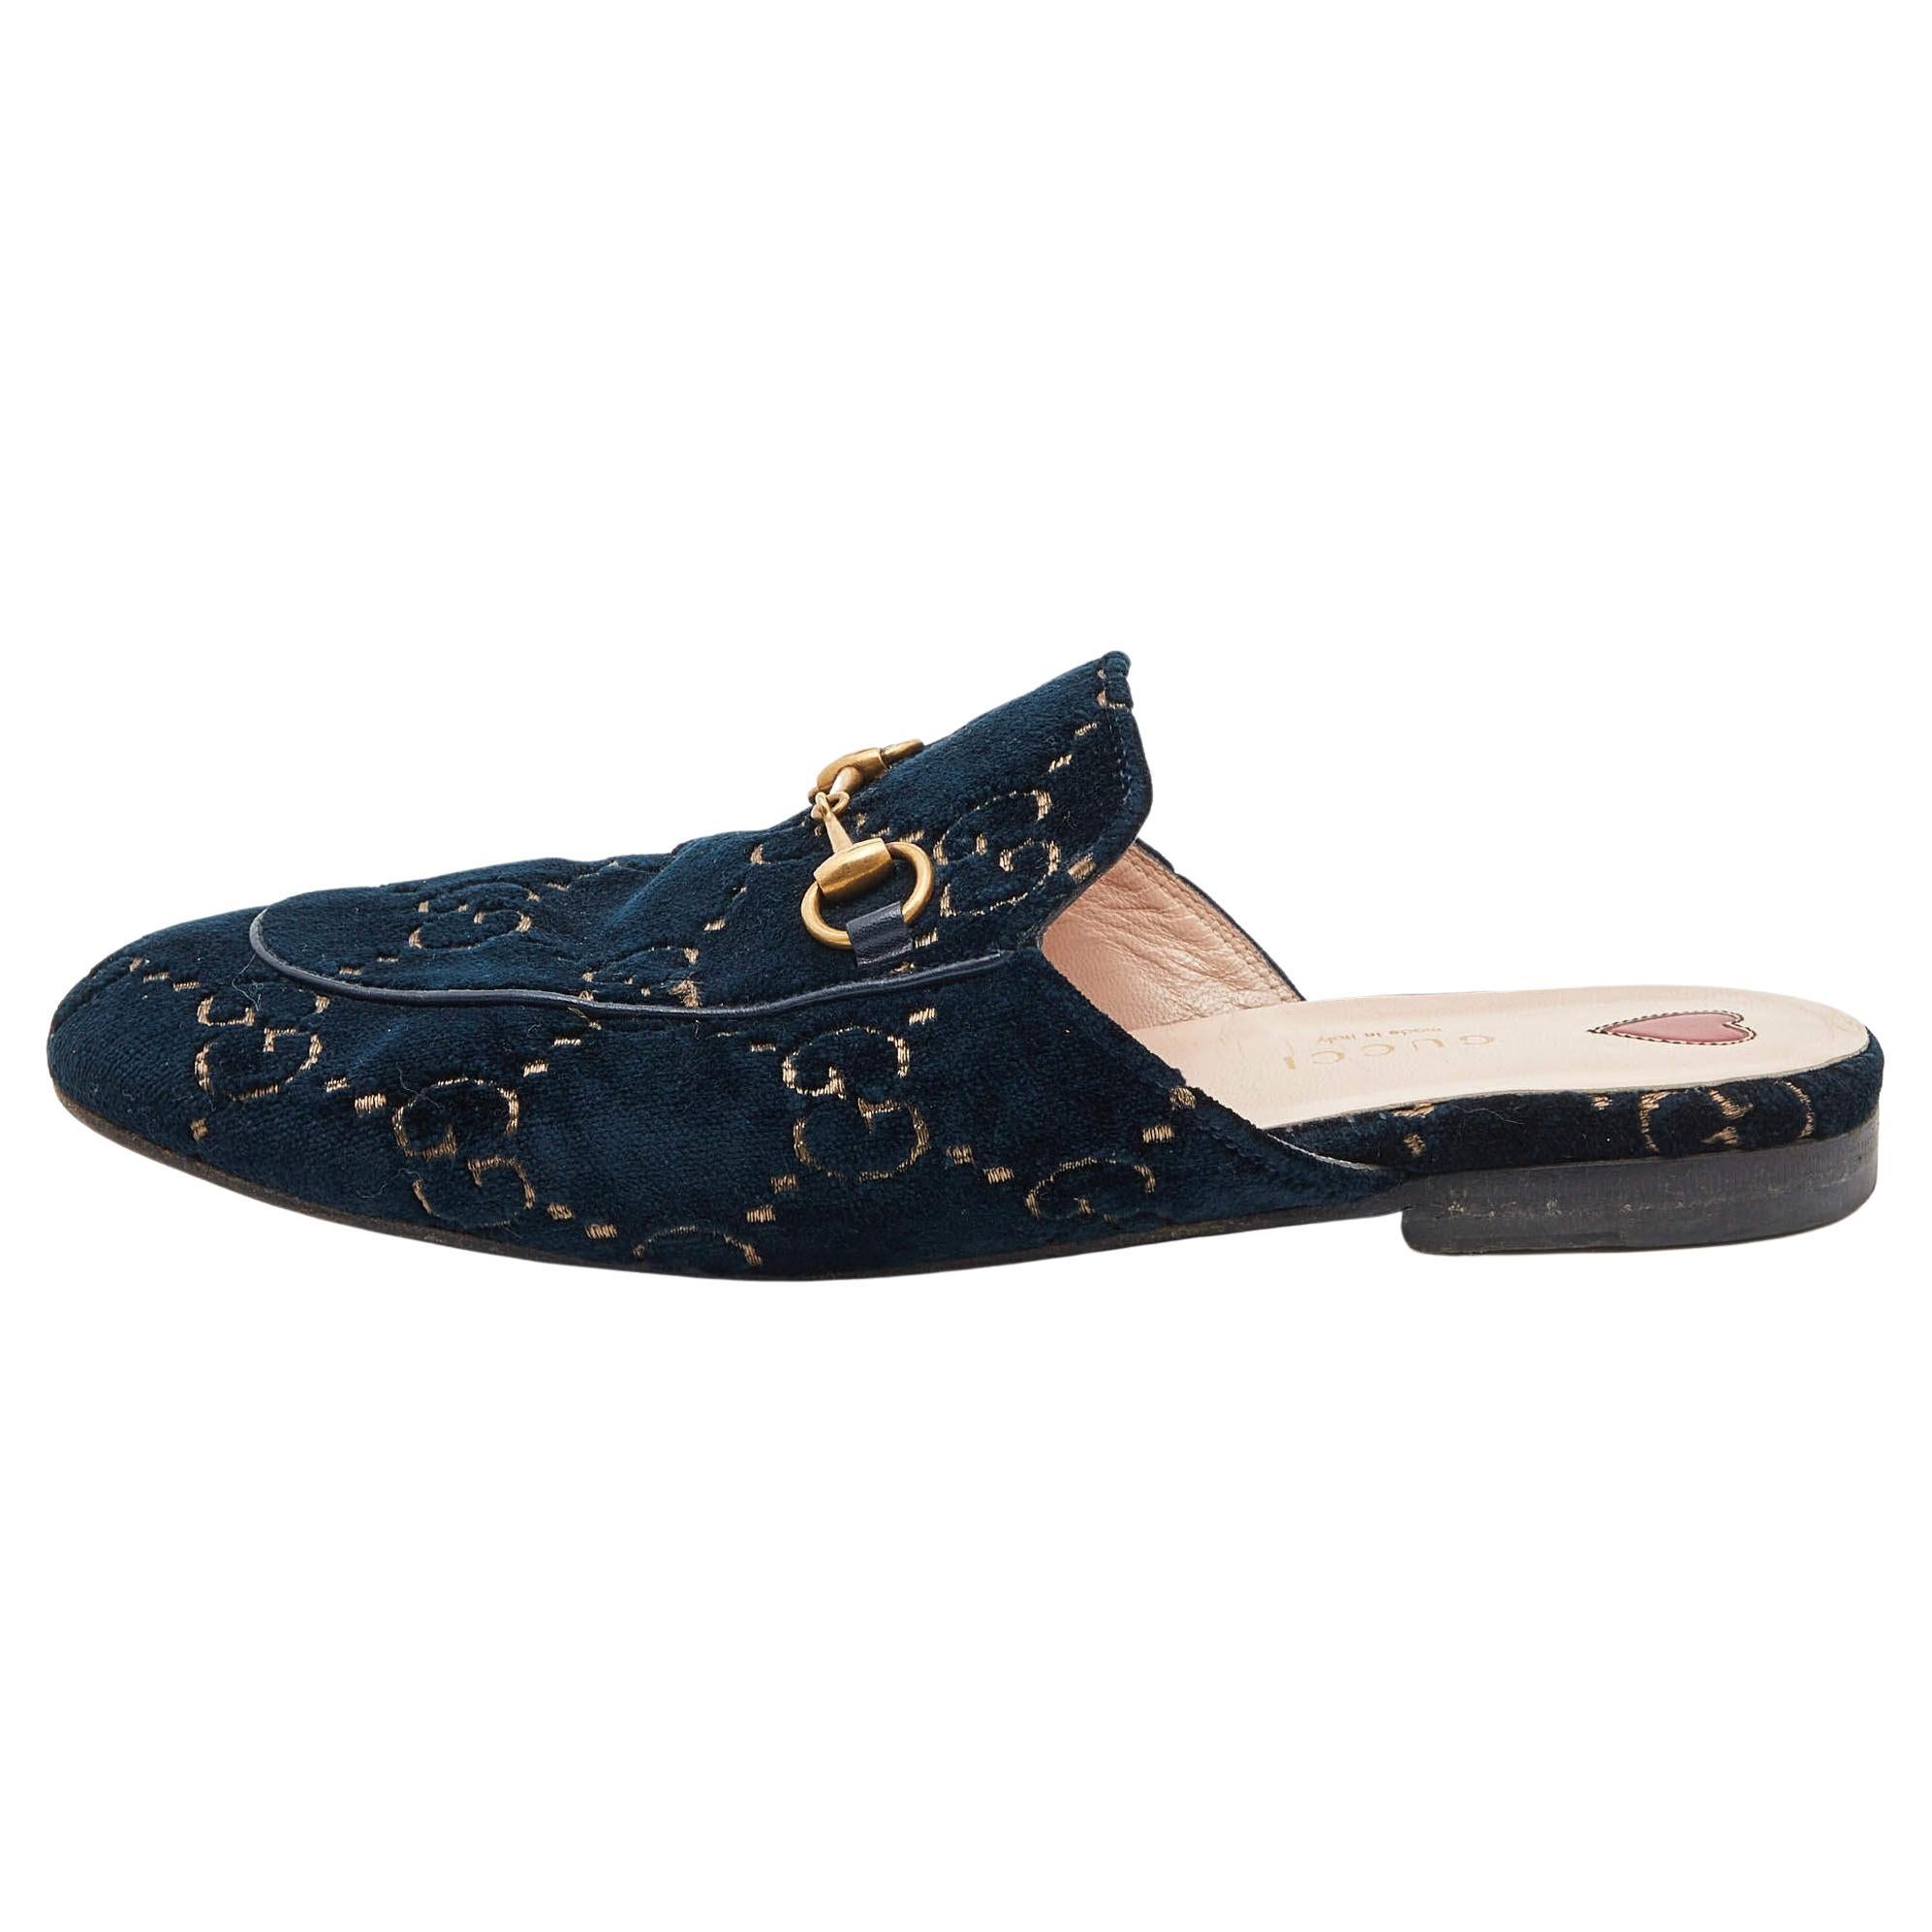 Gucci Blue/Gold GG Velvet Princetown Flat Mules Size 38